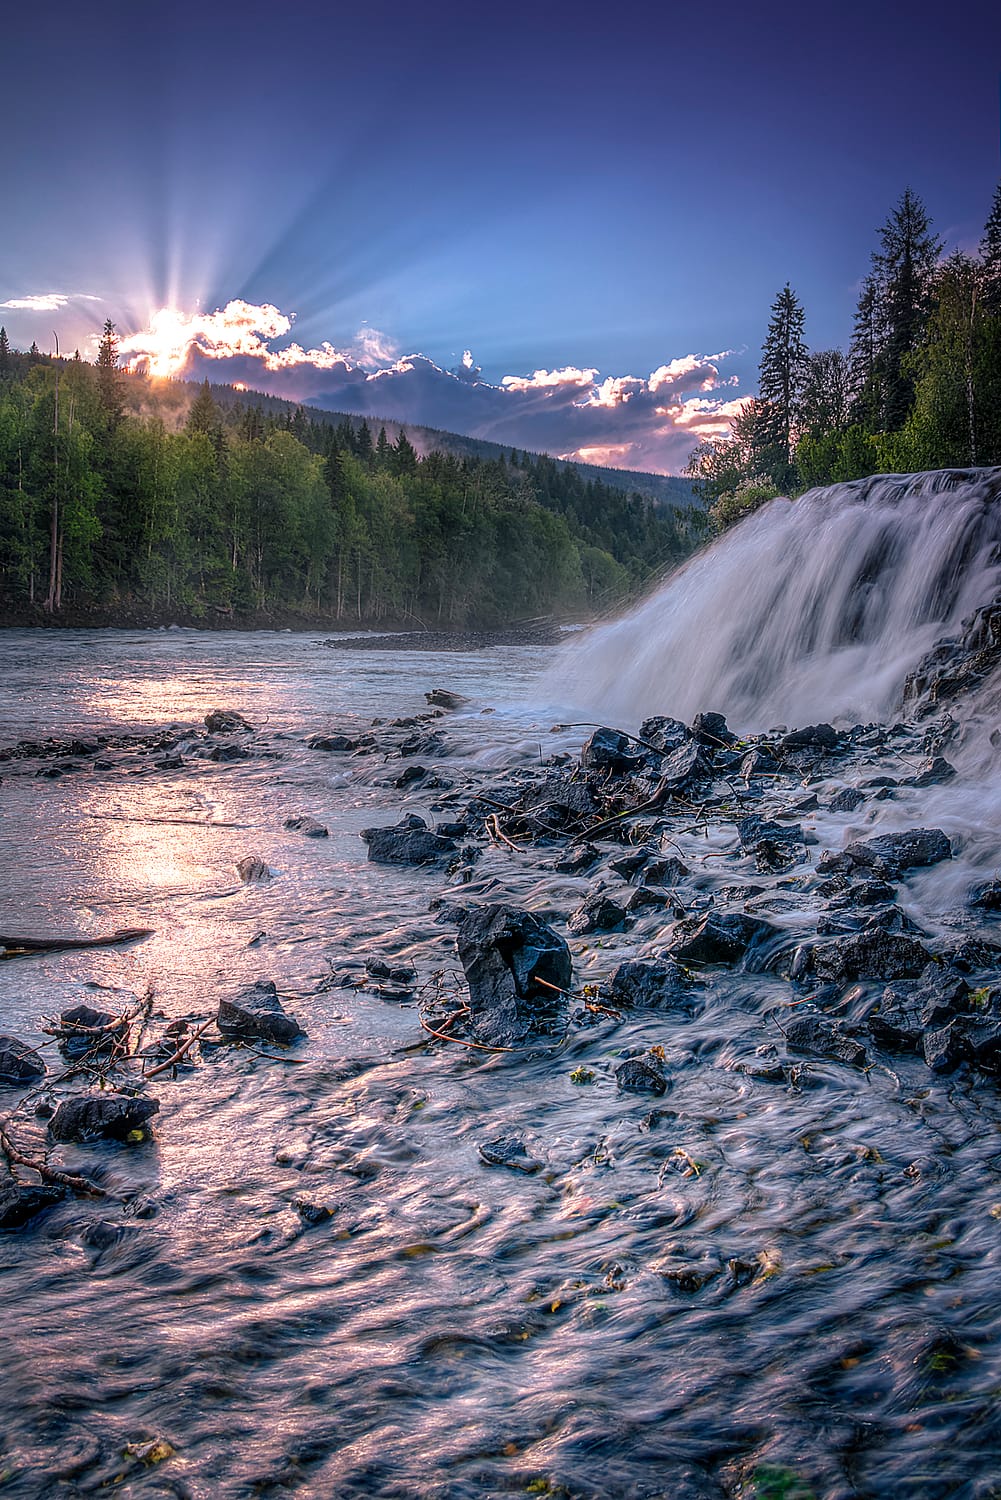 Sunset over a river with a waterfall